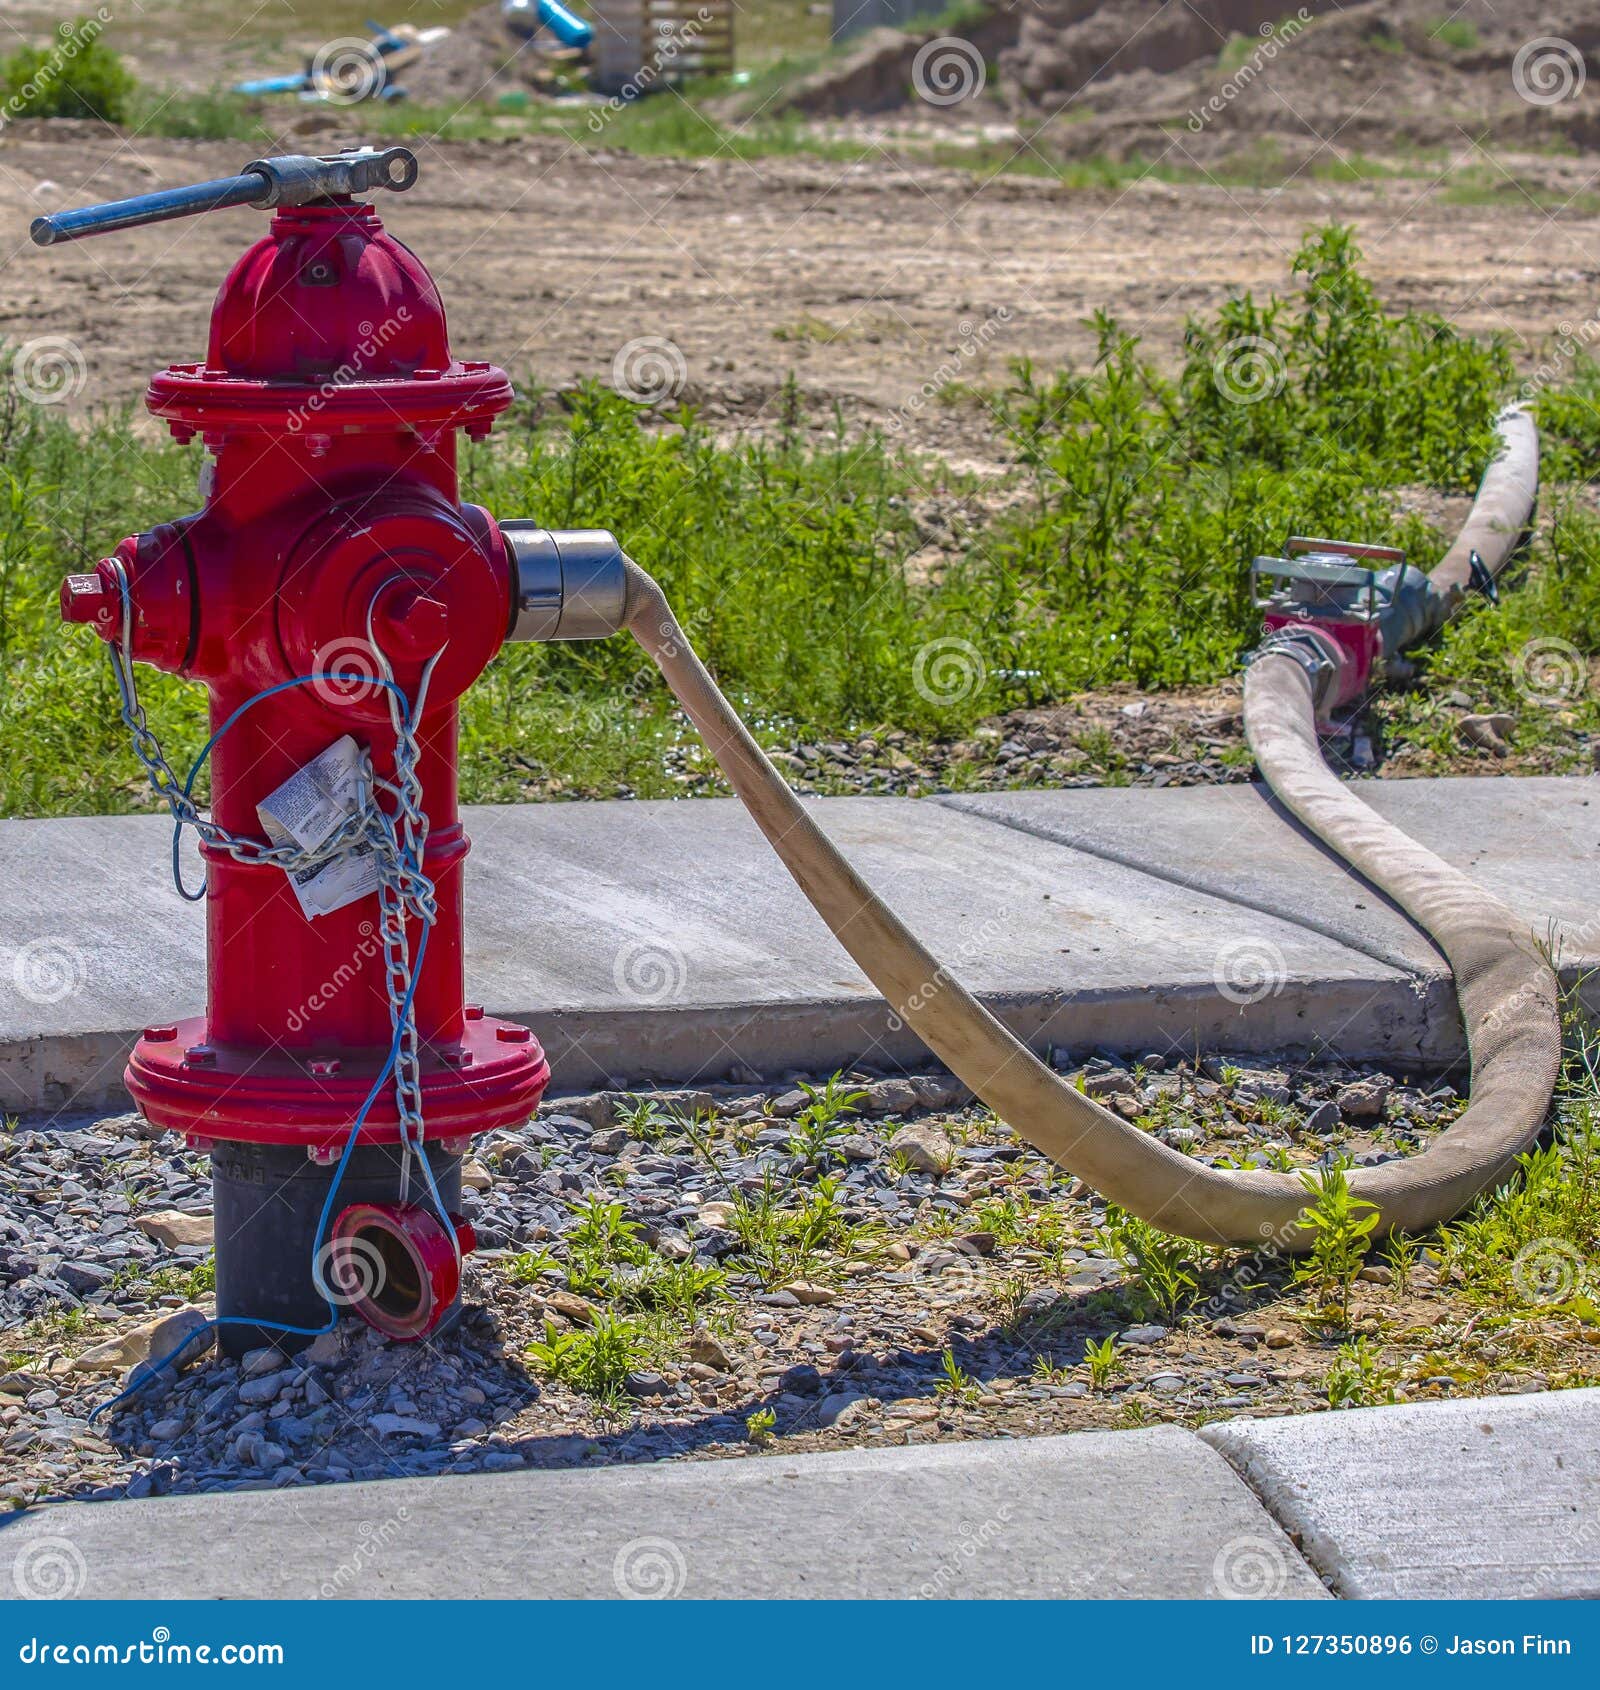 https://thumbs.dreamstime.com/z/red-fire-hydrant-hose-connected-to-outlet-rocky-ground-water-wrench-secured-operating-nut-top-127350896.jpg